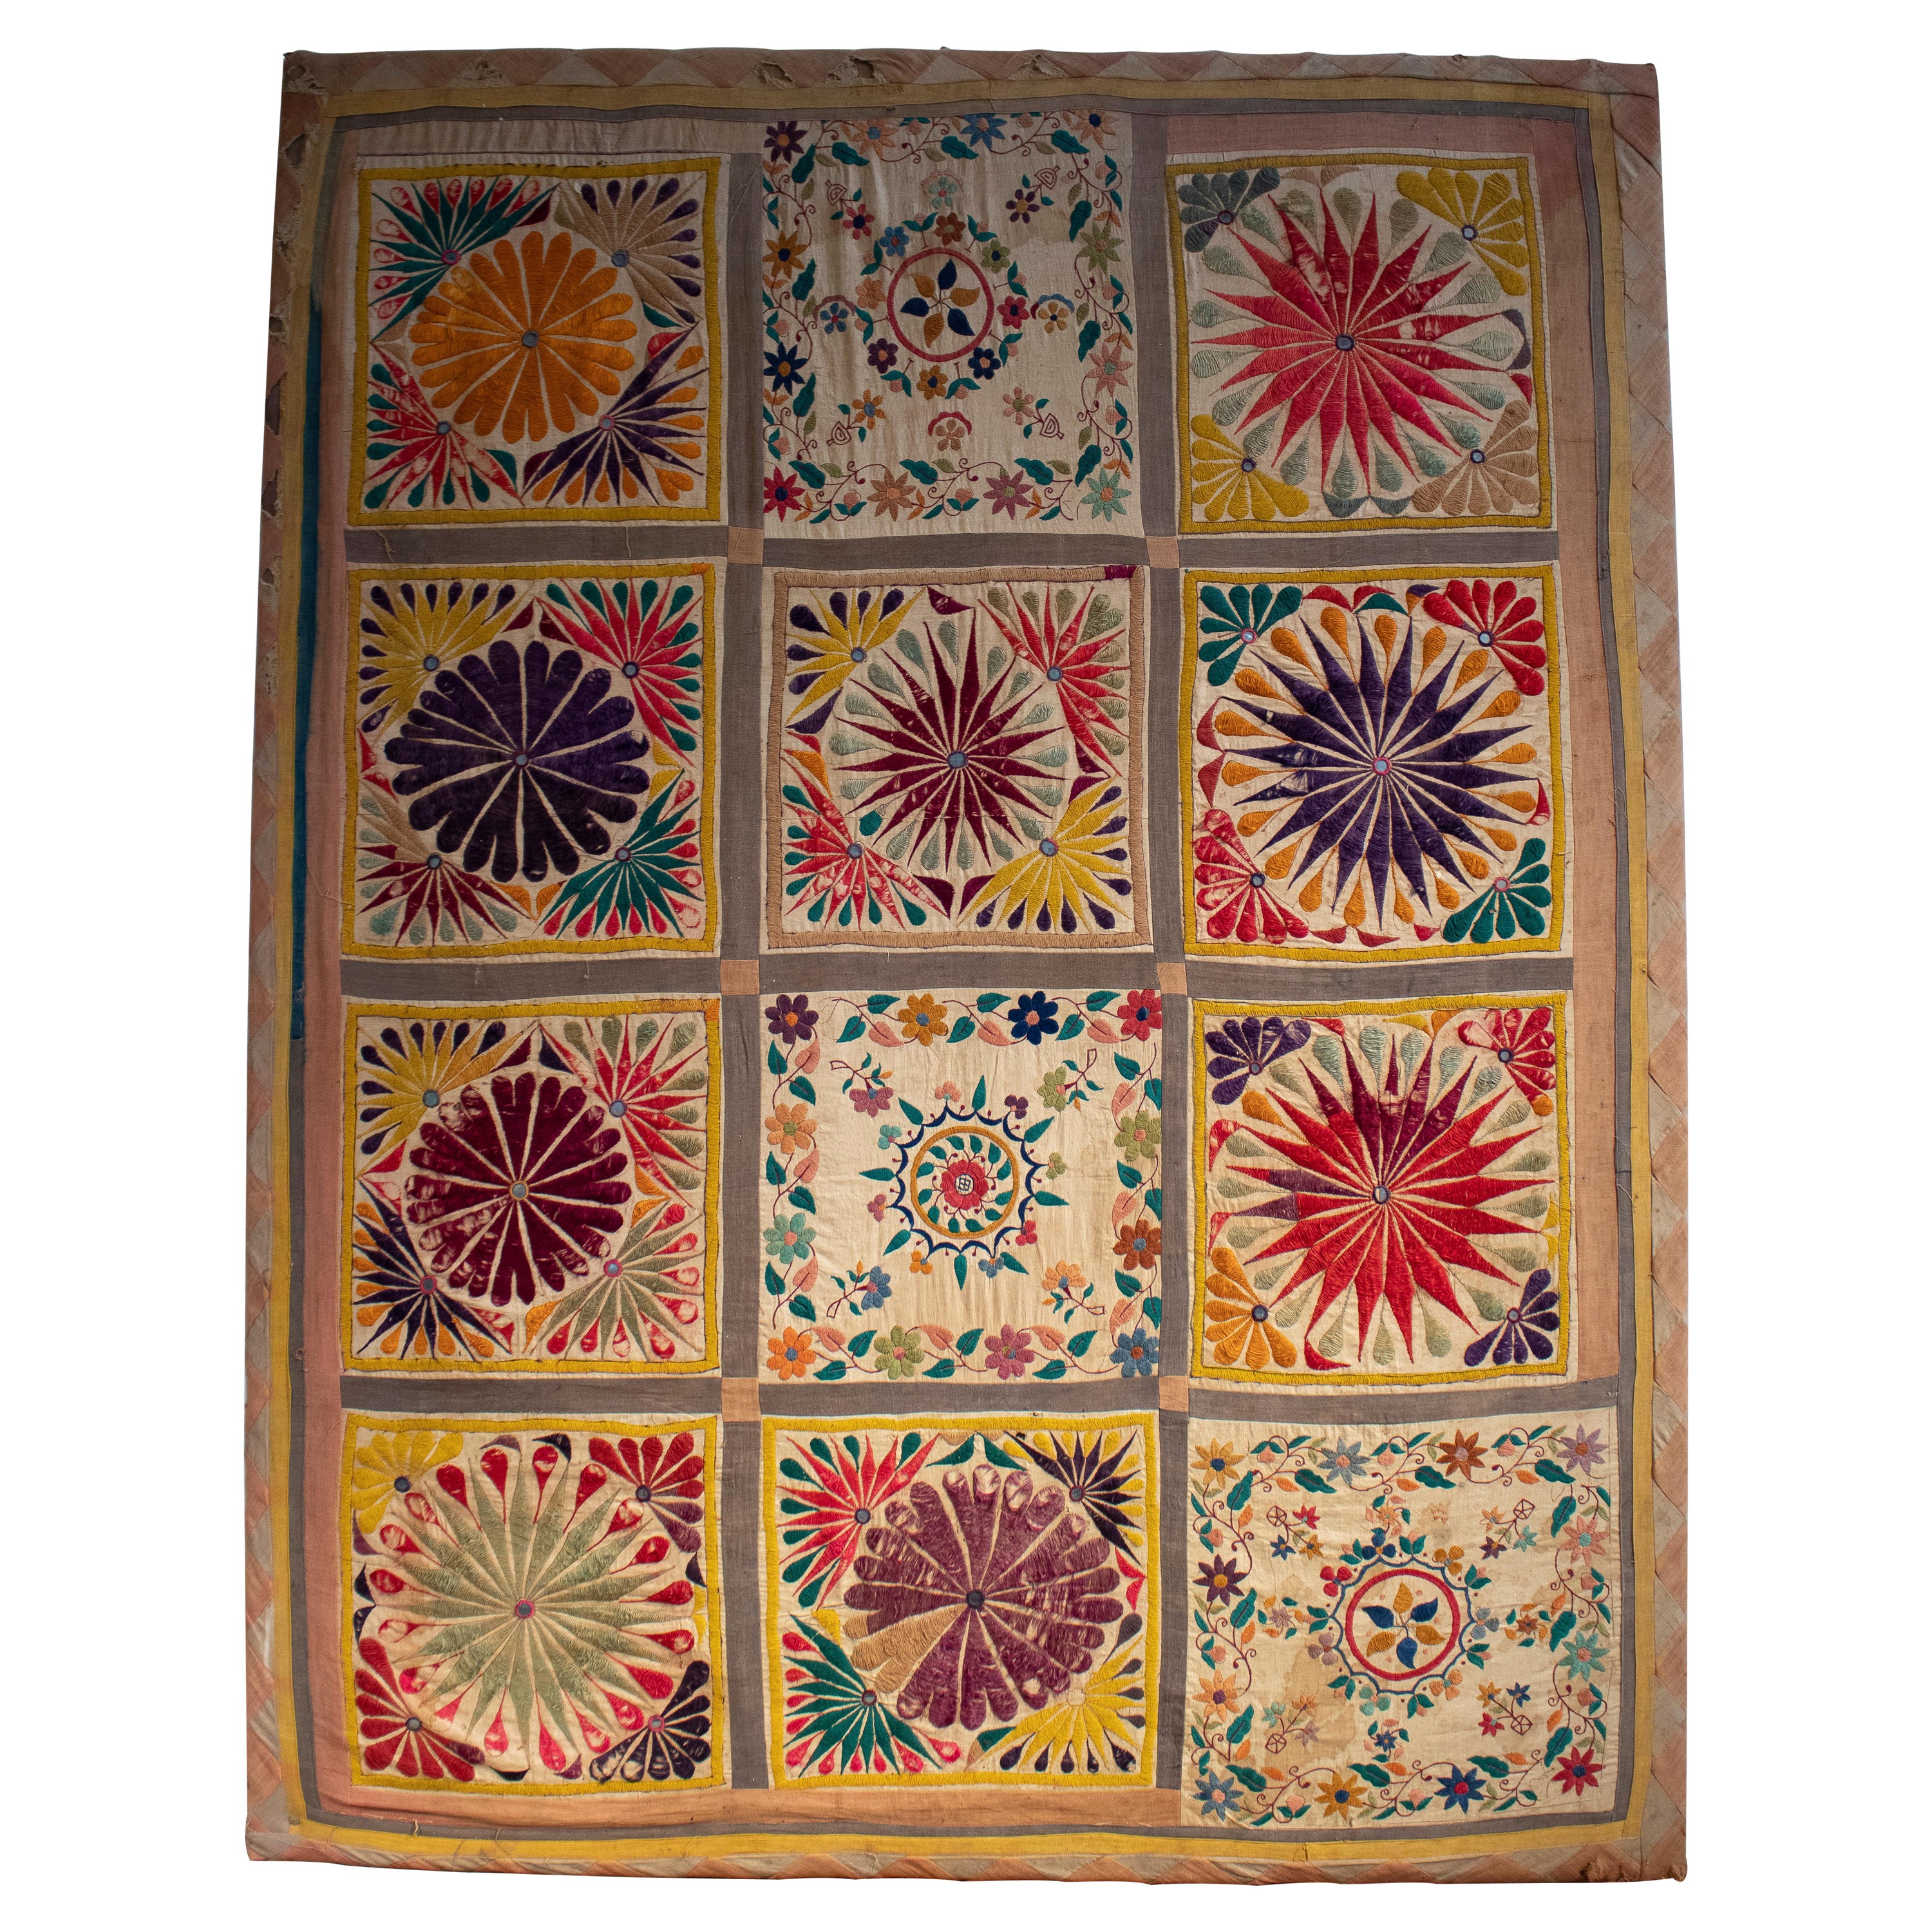 1950s Indian Hand Woven Tapestry Quilt